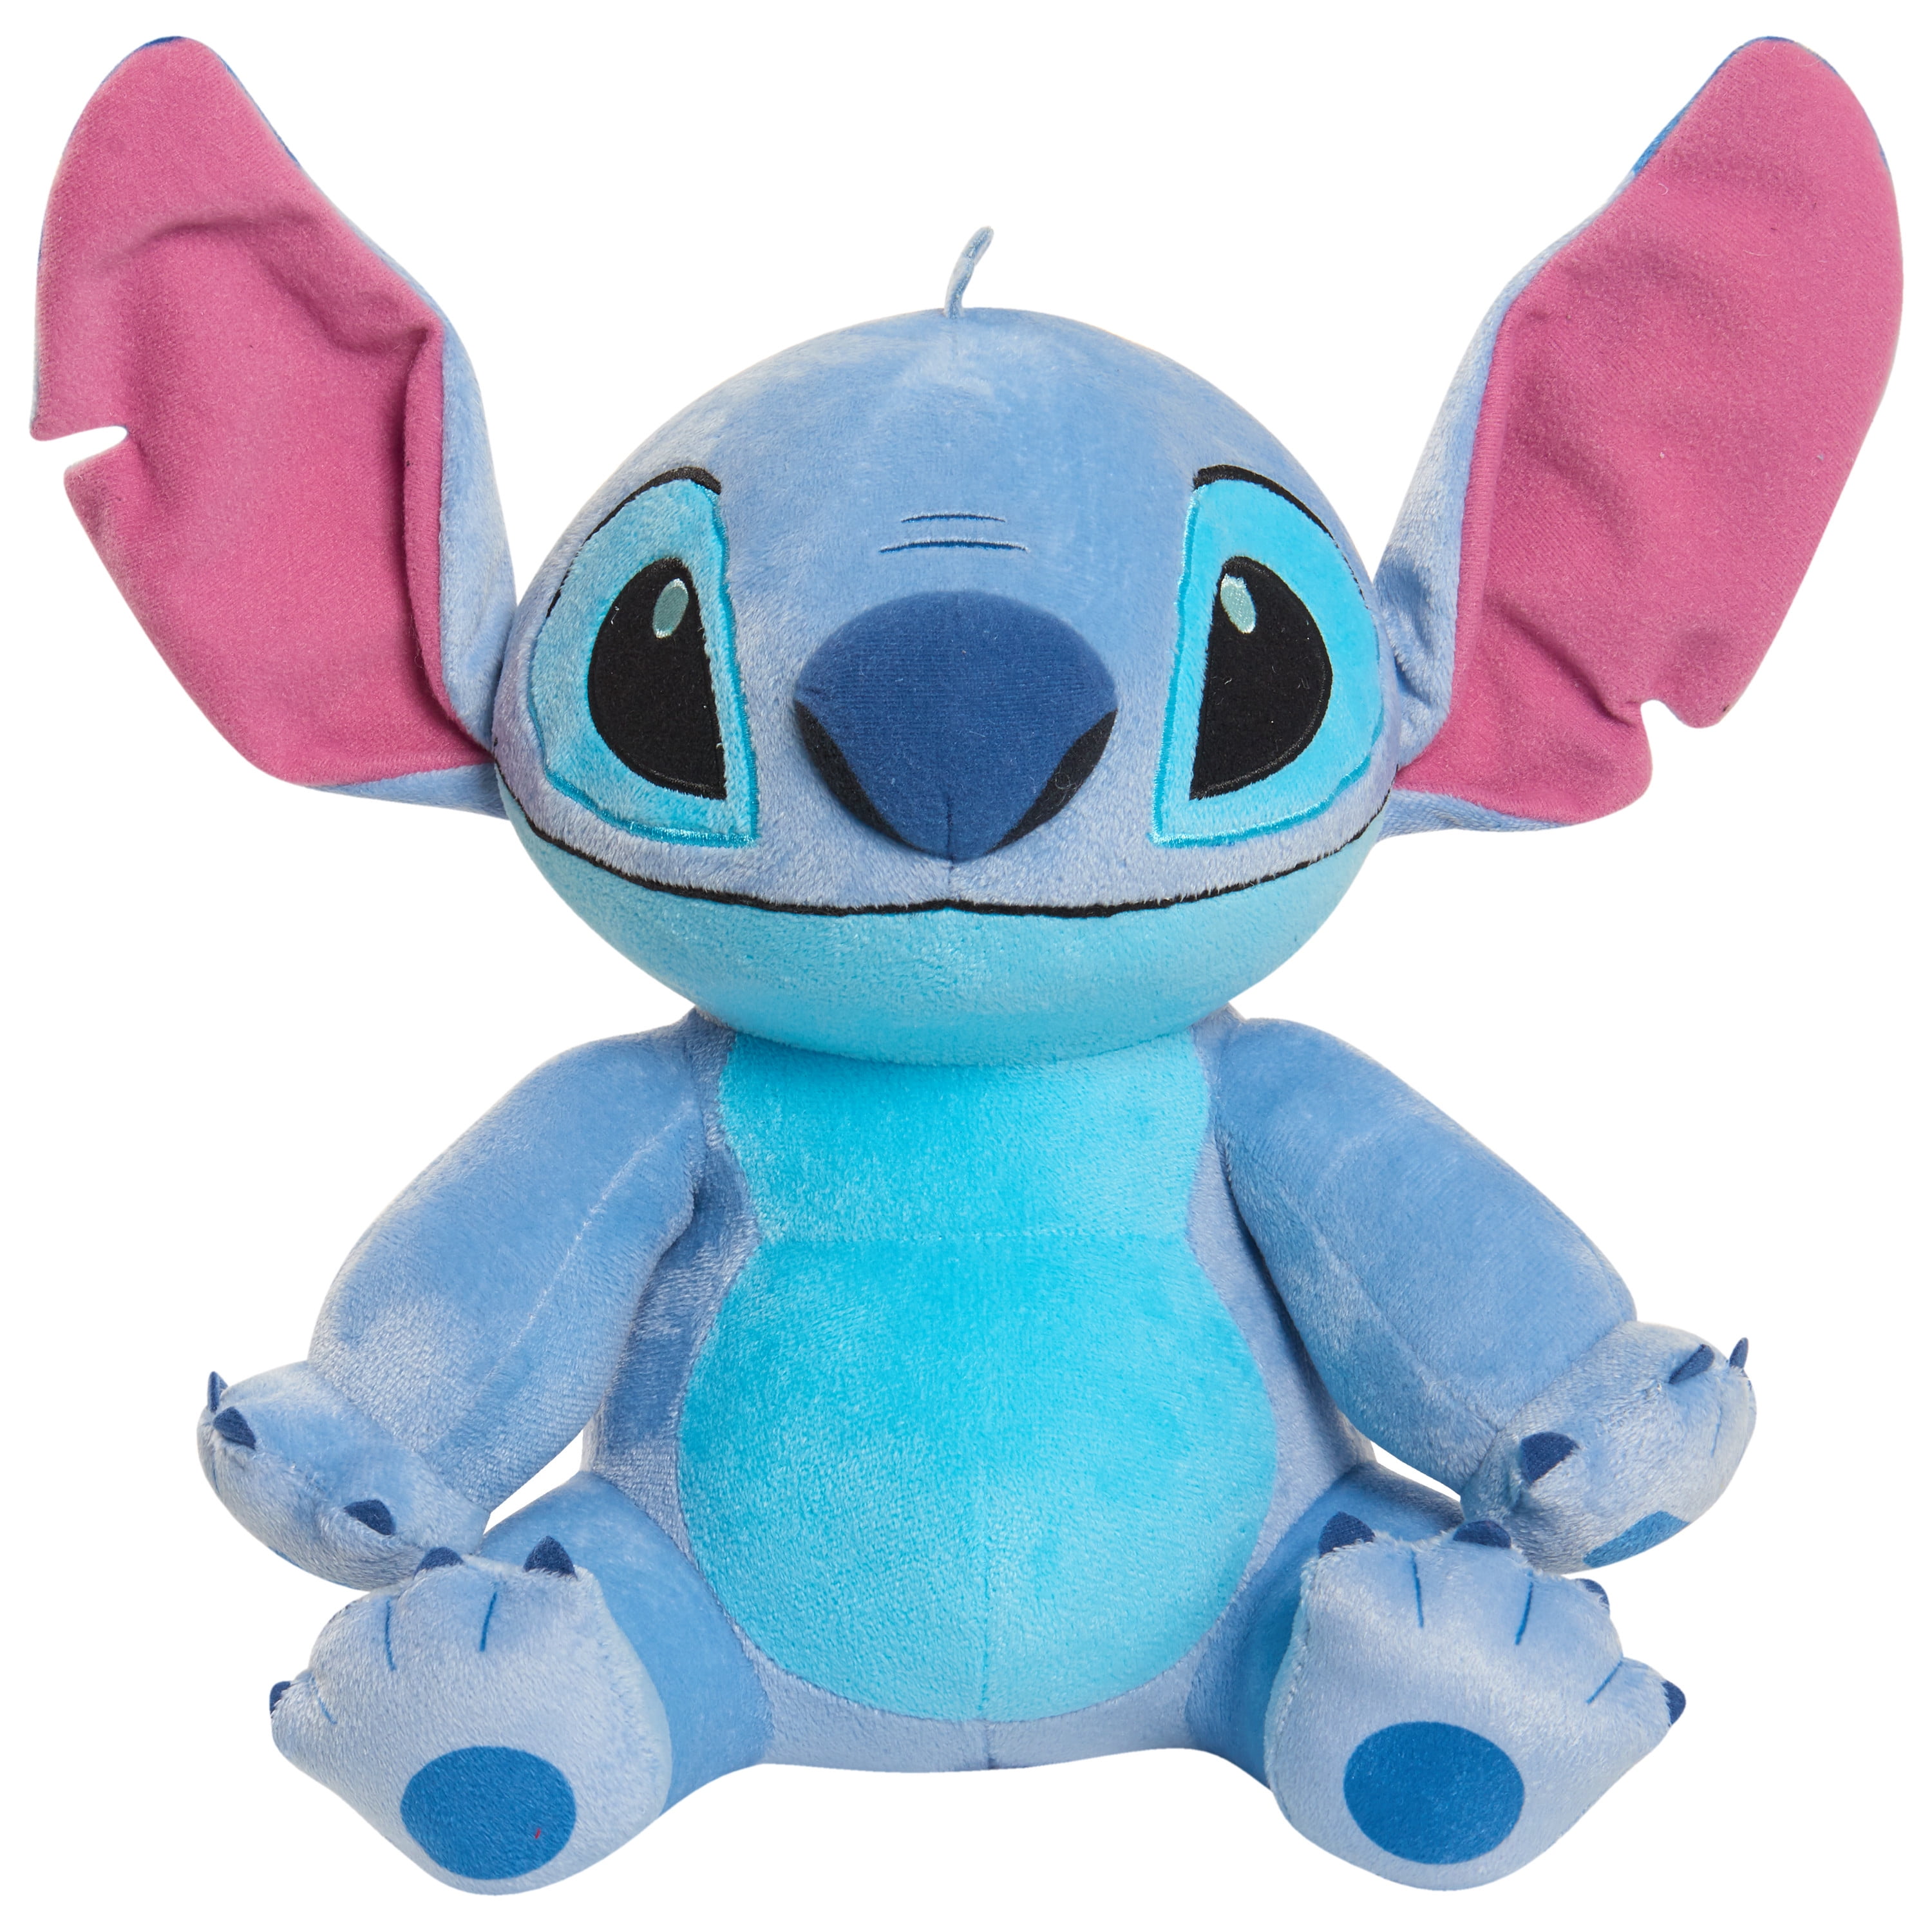 Disney Stitch Plush Easter Bunny, Small 9 1/2 inch, for Boys and Girls, Squishy Animals, Perfect Easter Basket Stuffer or Spring Decor, Suitable for